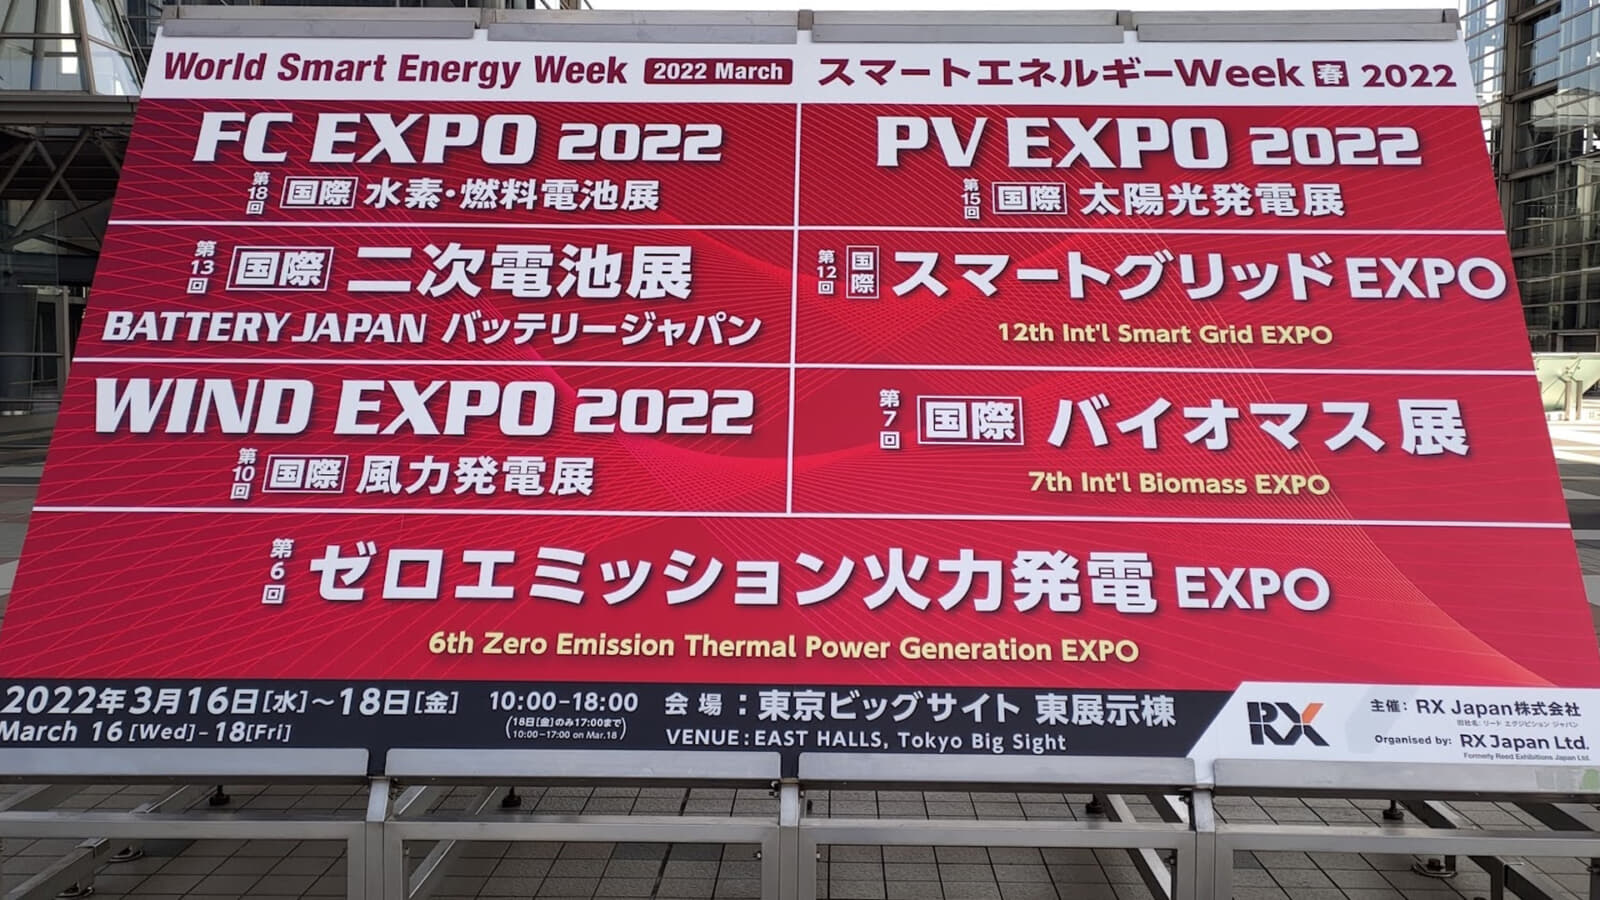 WIND EXPO(風力発電)春展レポート、最先端の充電式ボルト締結工具ソリューション